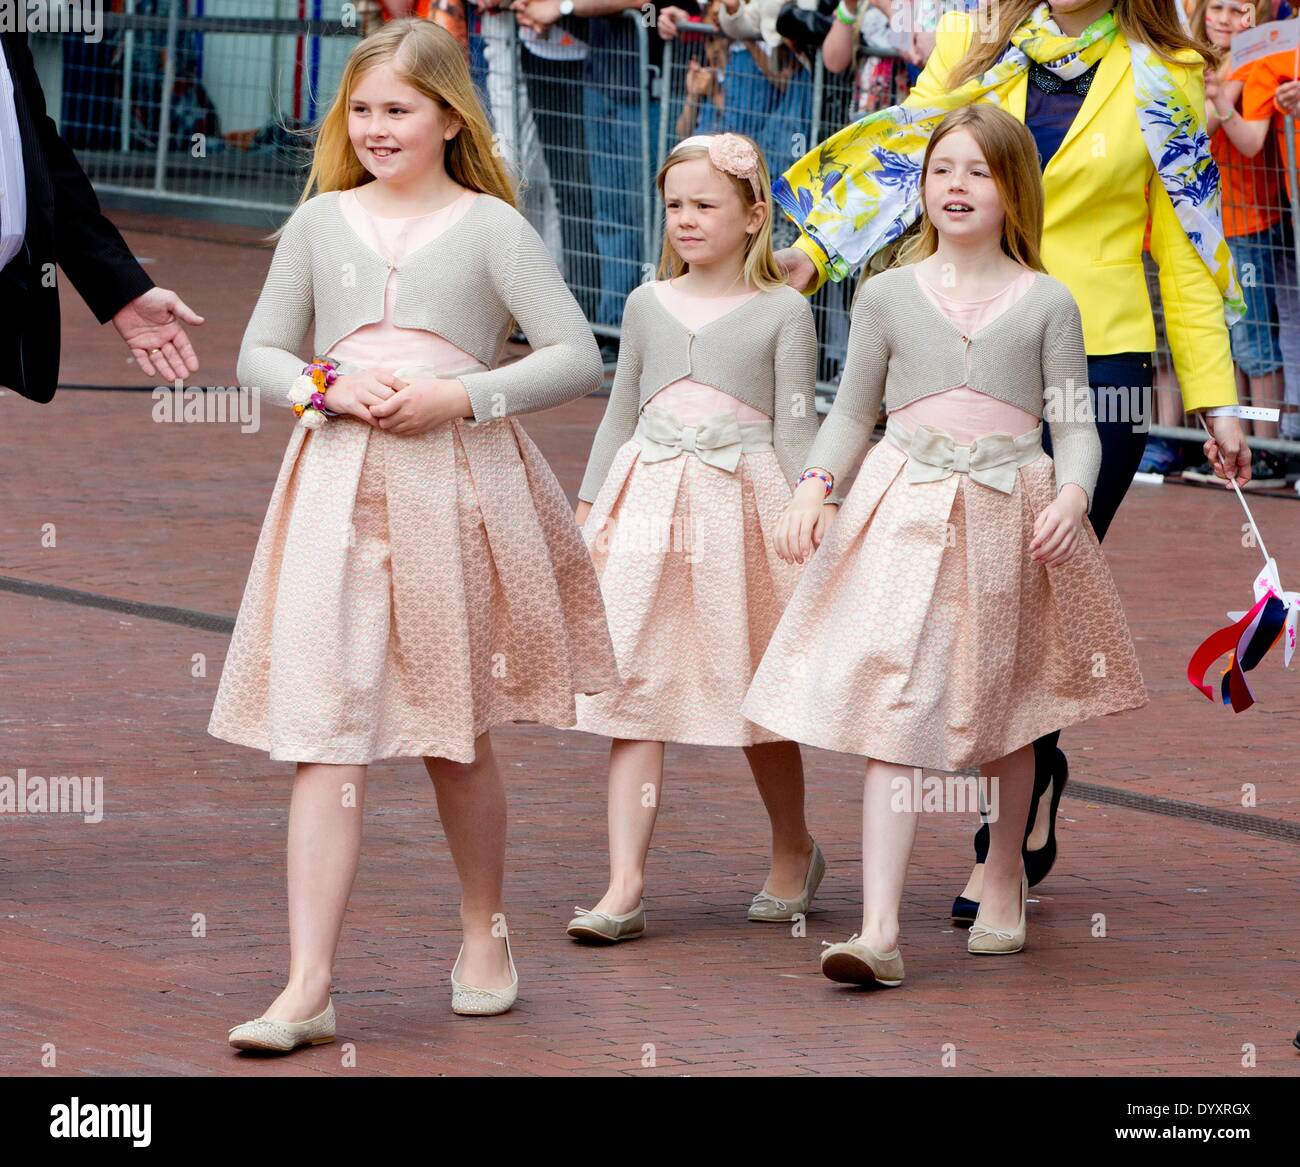 De Rijp, The Netherlands. 26th Apr, 2014. Dutch Crown Princess Amalia (L), Princess Alexia (R) and Princess Ariane with the nanny attend the King's Day (Koningsdag) celebrations in De Rijp, The Netherlands, 26 April 2014. The Dutch Royal family celebrates the birthday of the King on 27 April at King' s Day. Photo: Patrick van Katwijk/ - NO WIRE SERVICE/dpa/Alamy Live News Stock Photo